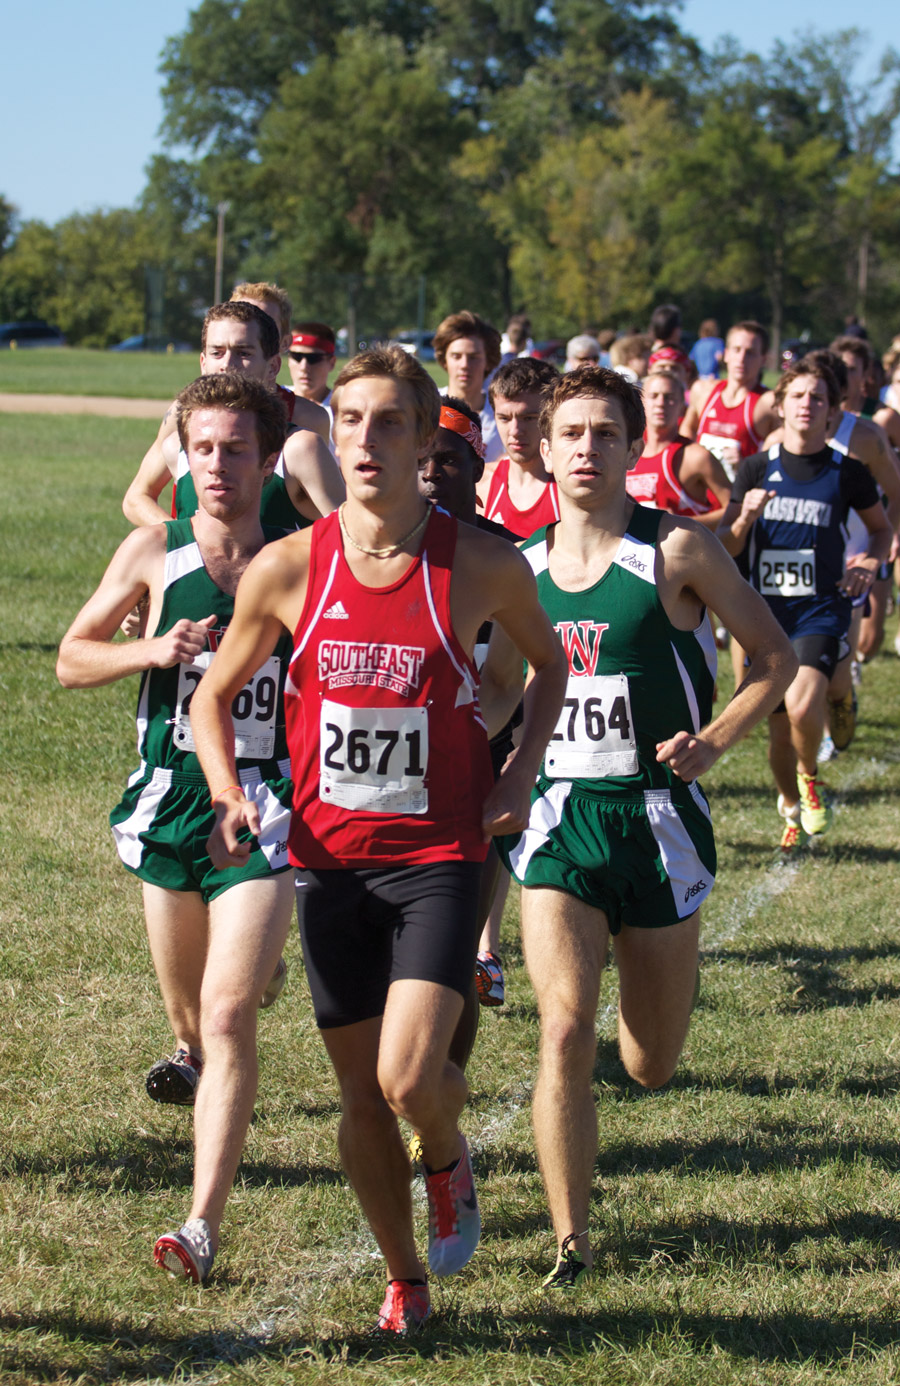 Wash. U. Cross Country runs well against tough field | Student Life